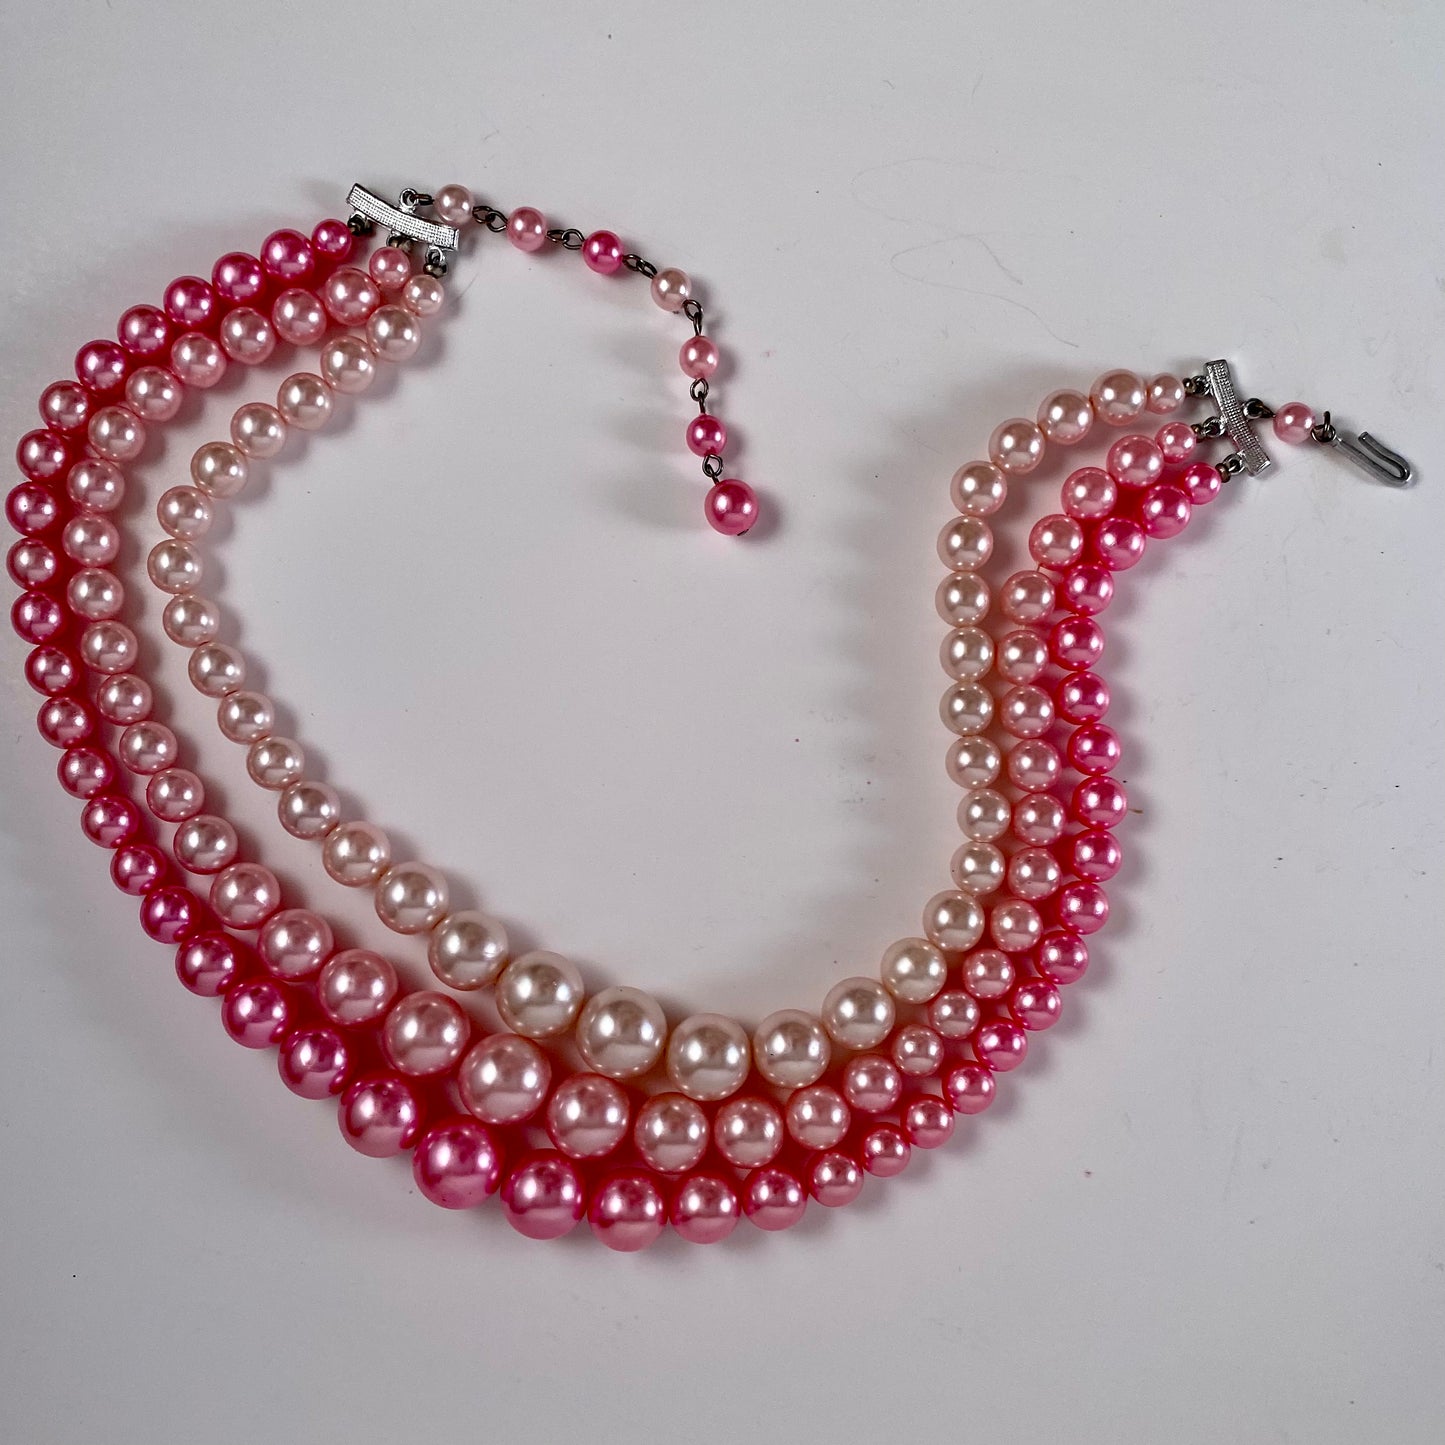 1960s Japan 3-Strand Bead Necklace